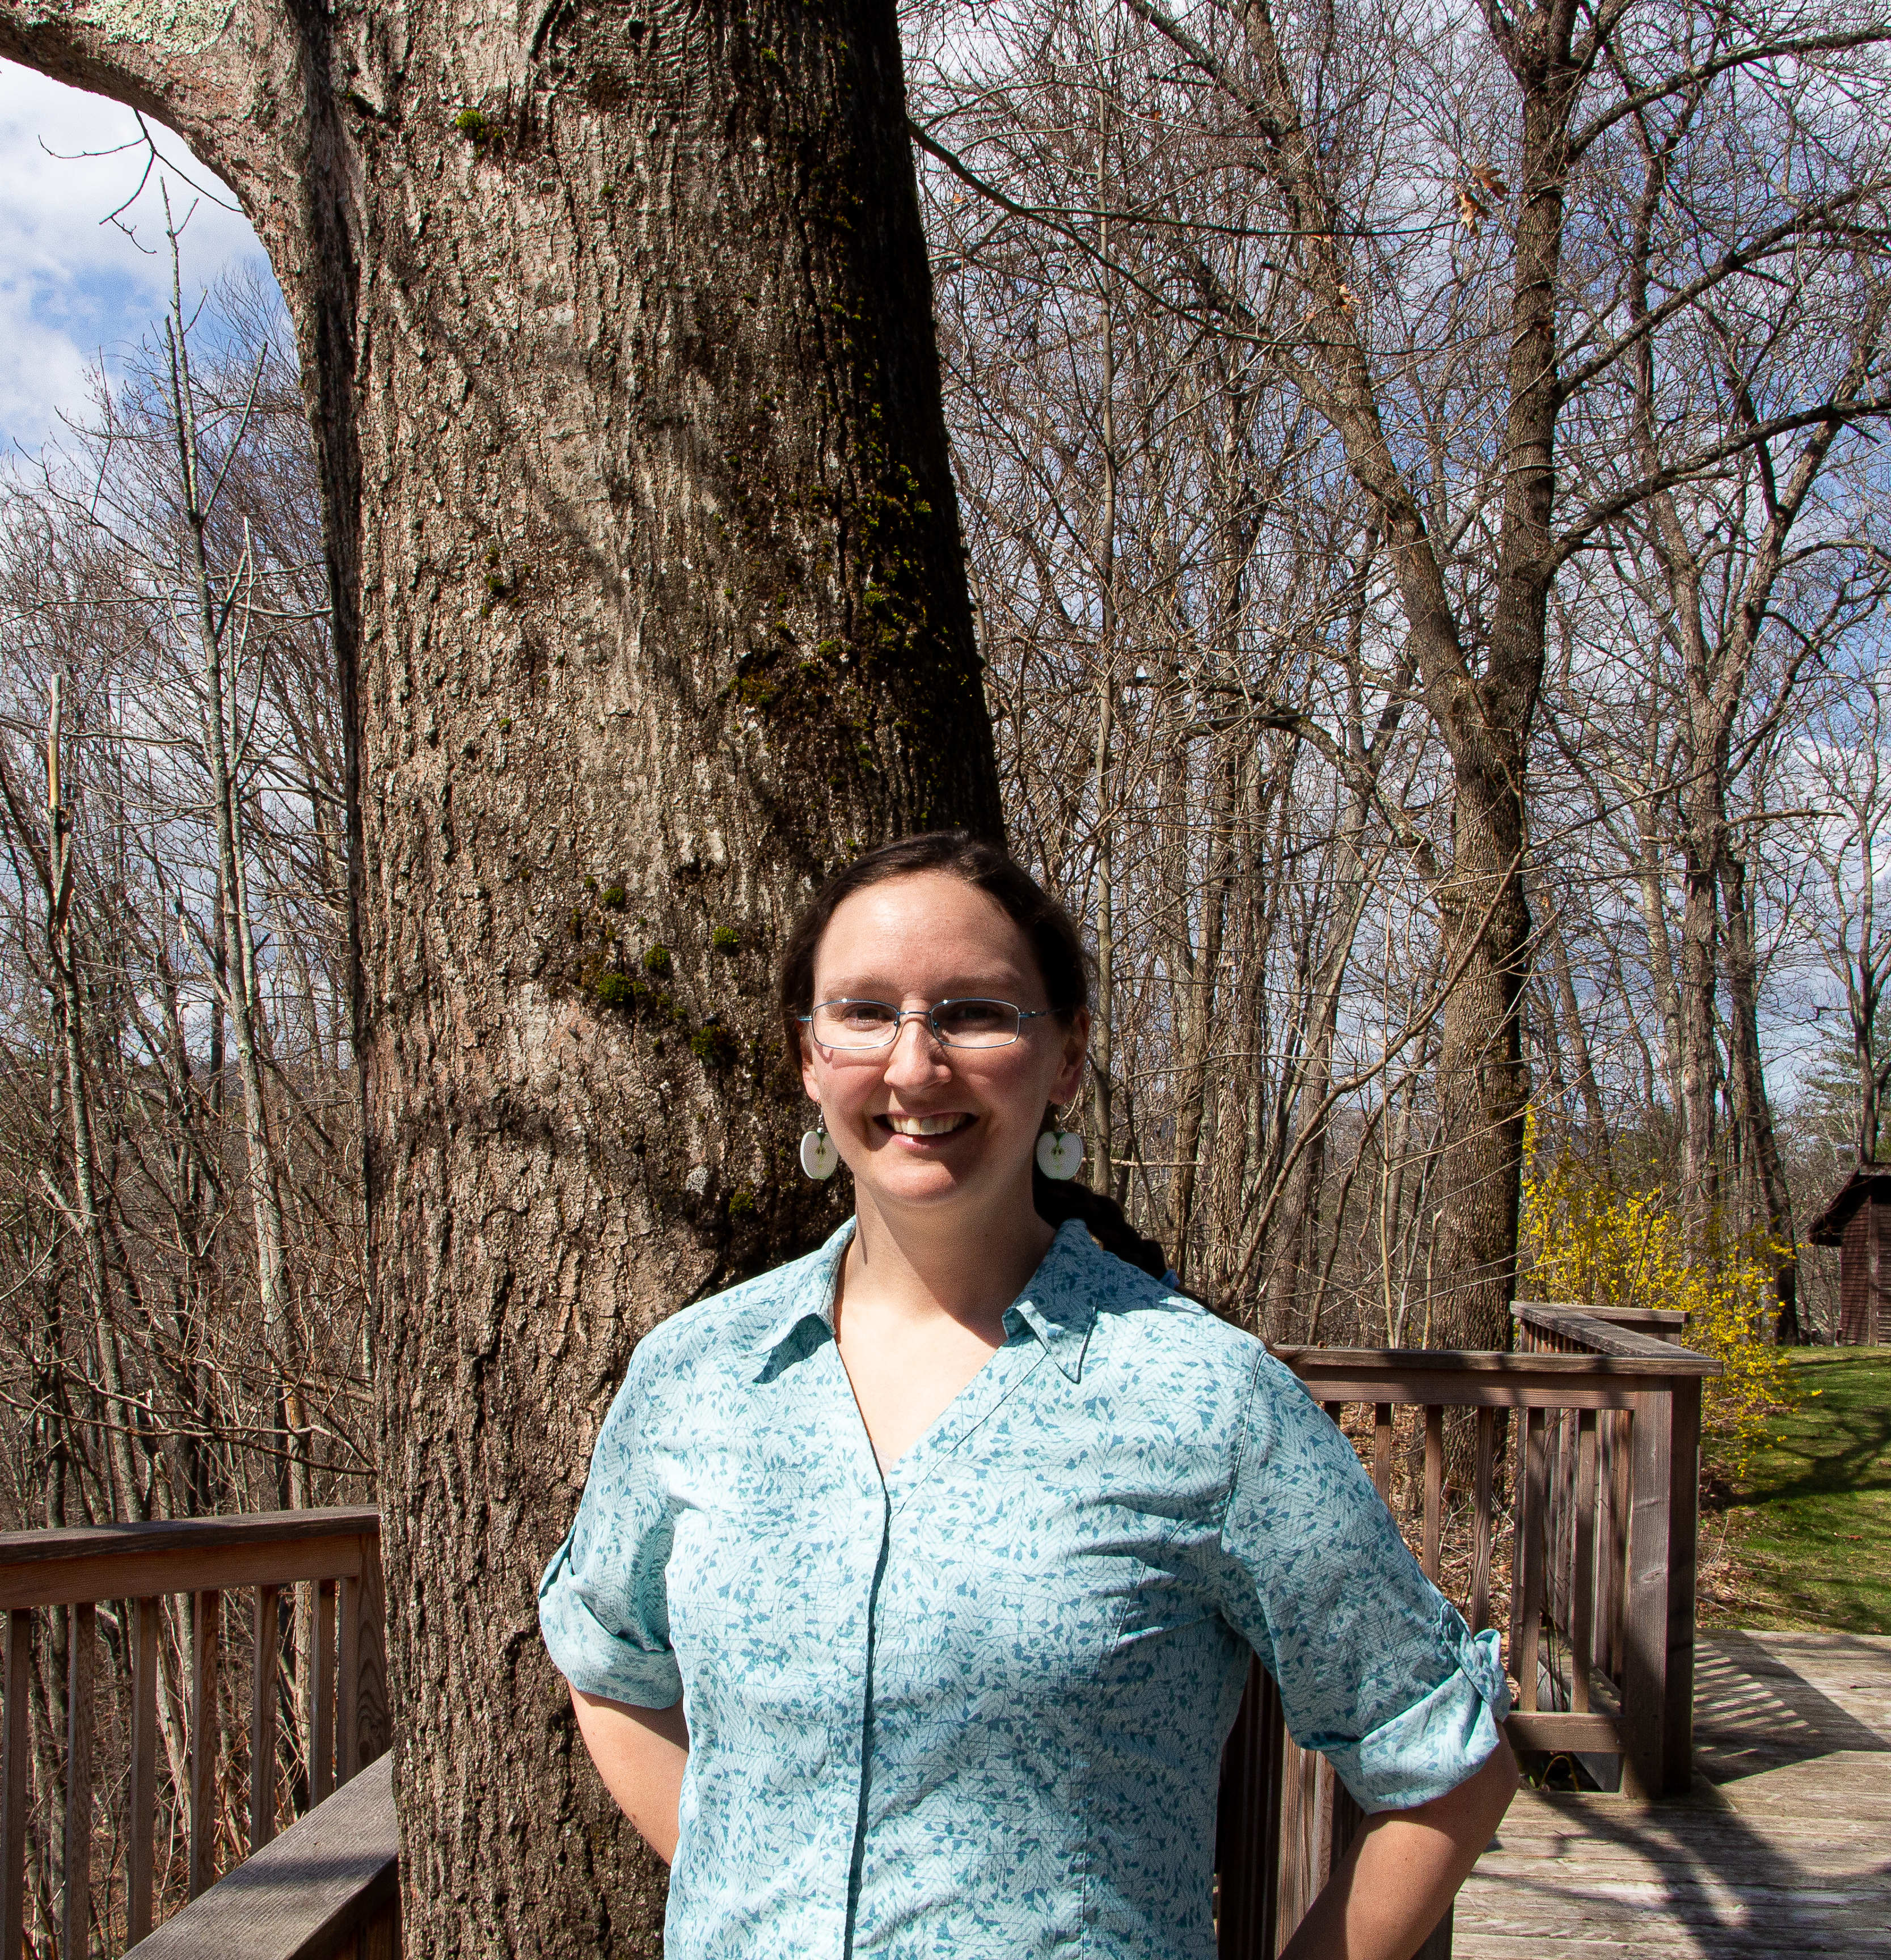 Young woman in a blue button up shirt stands in front of a tree